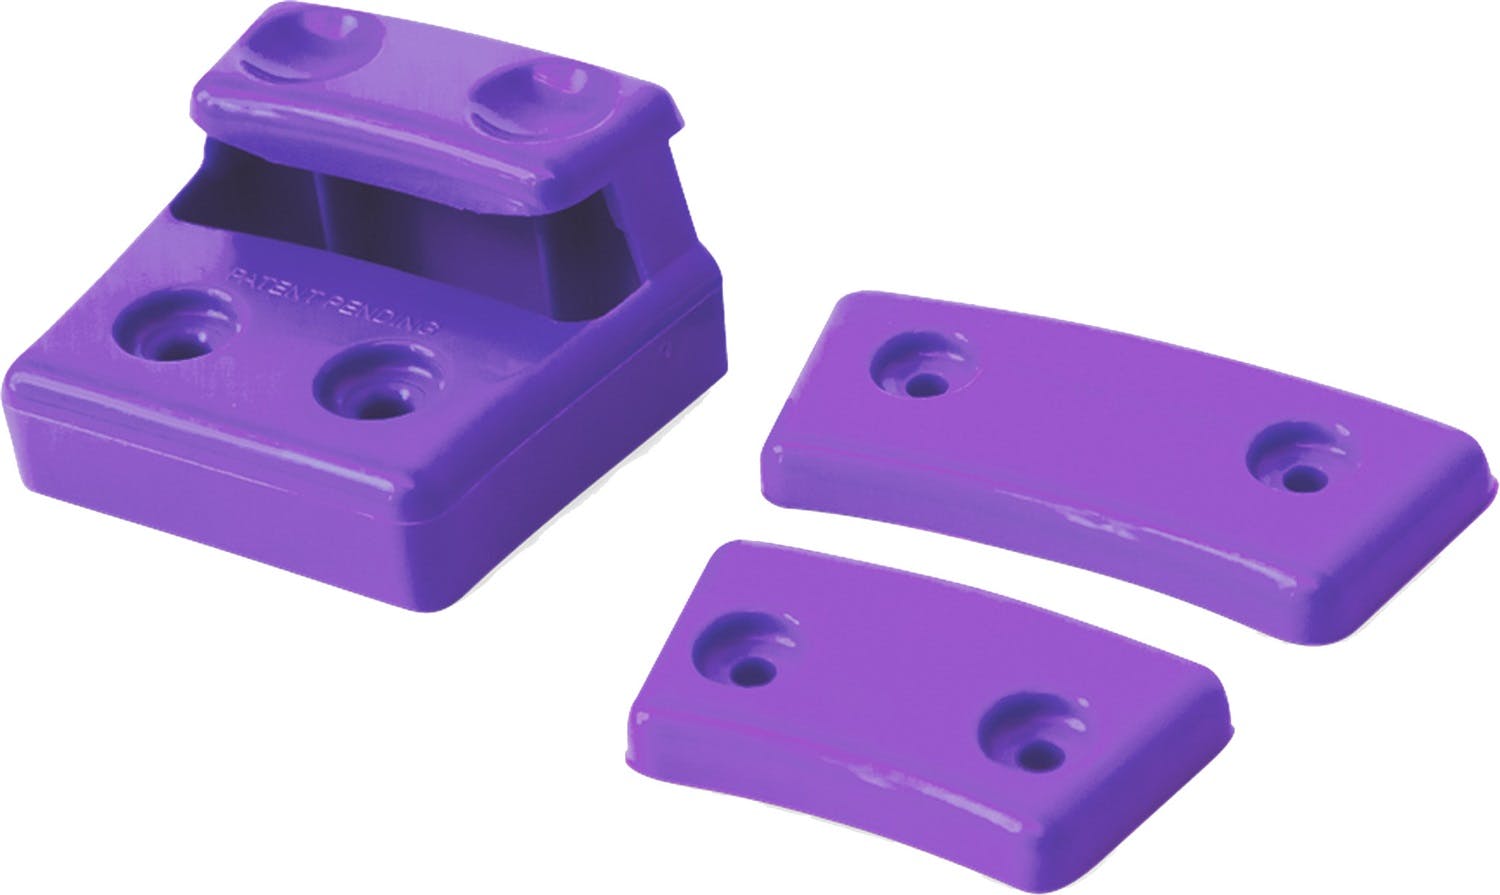 Daystar KU76148PR Cam Can Colored Replacement Cams; Purple